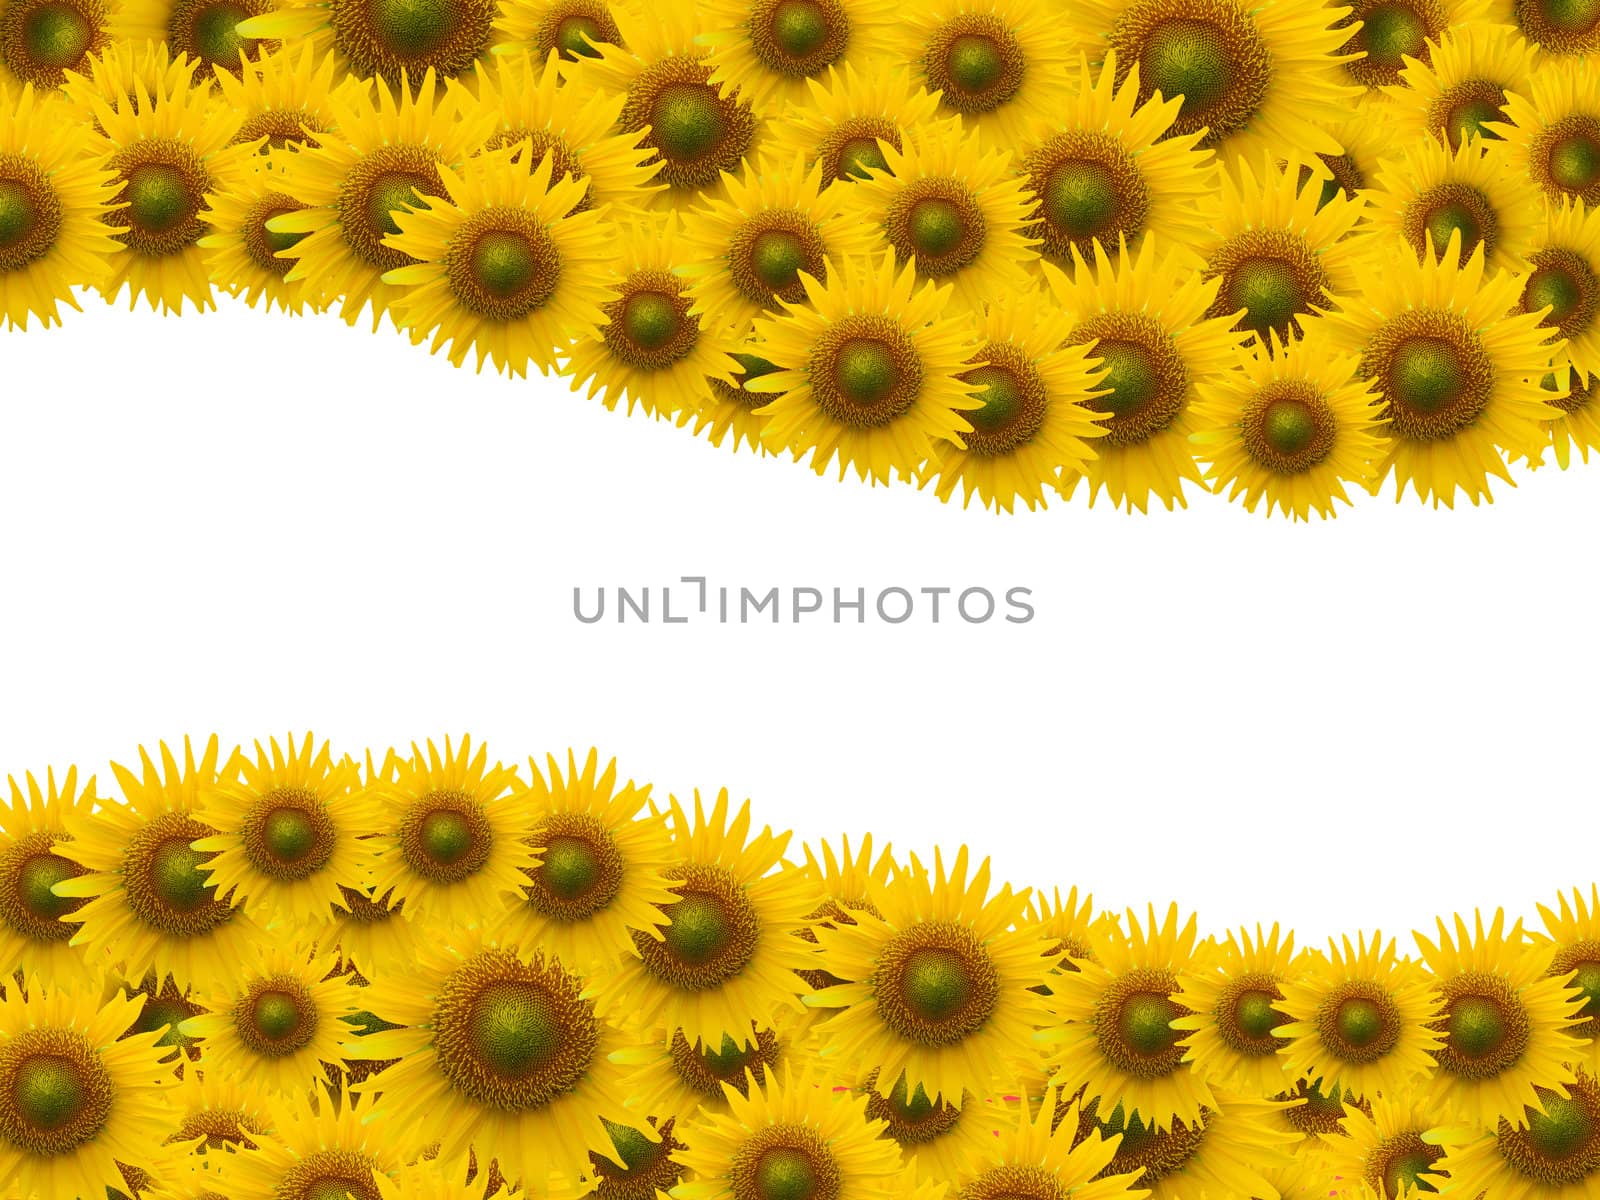 Many sunflower on white space background by jakgree